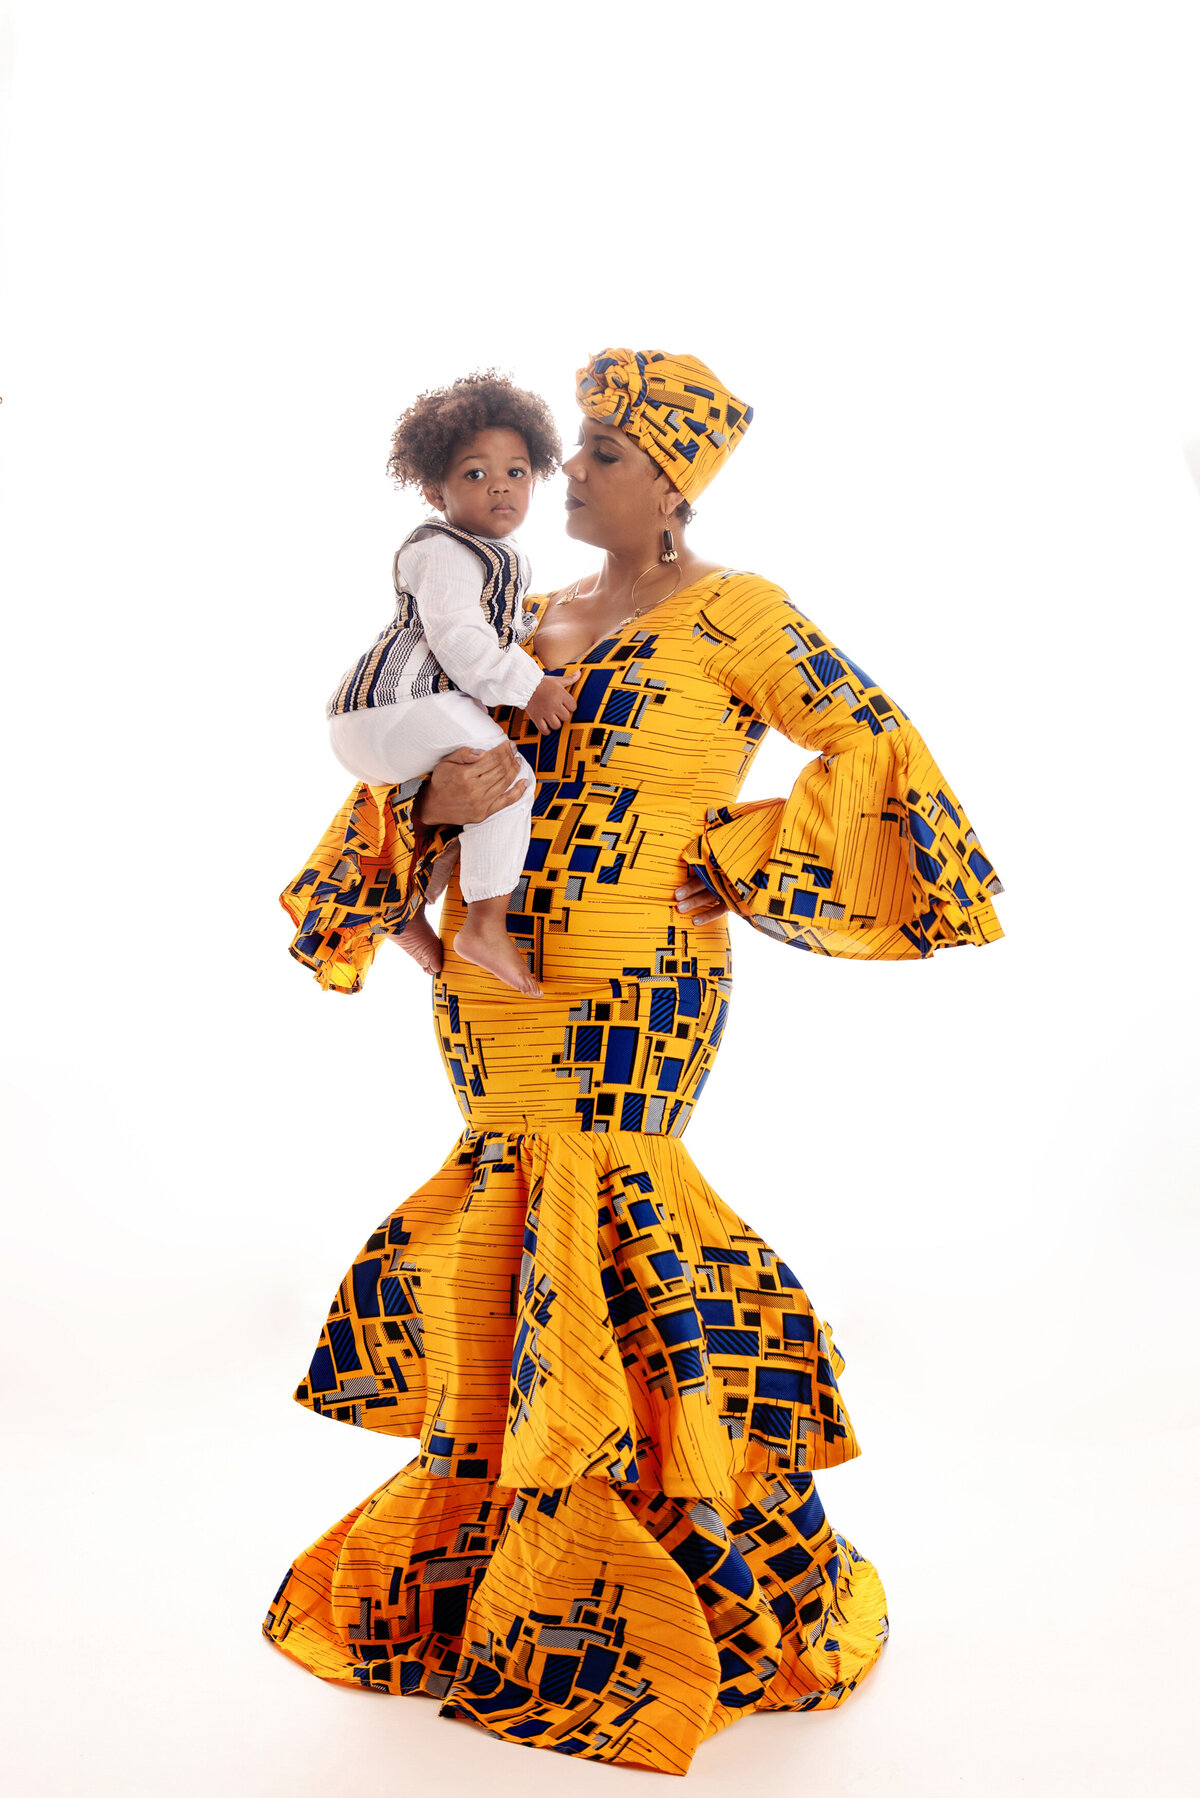 st-louis-family-photographer-mom-wearing-traditional-african-dress-and-head-wrap-holding-boy-wearing-dashiki